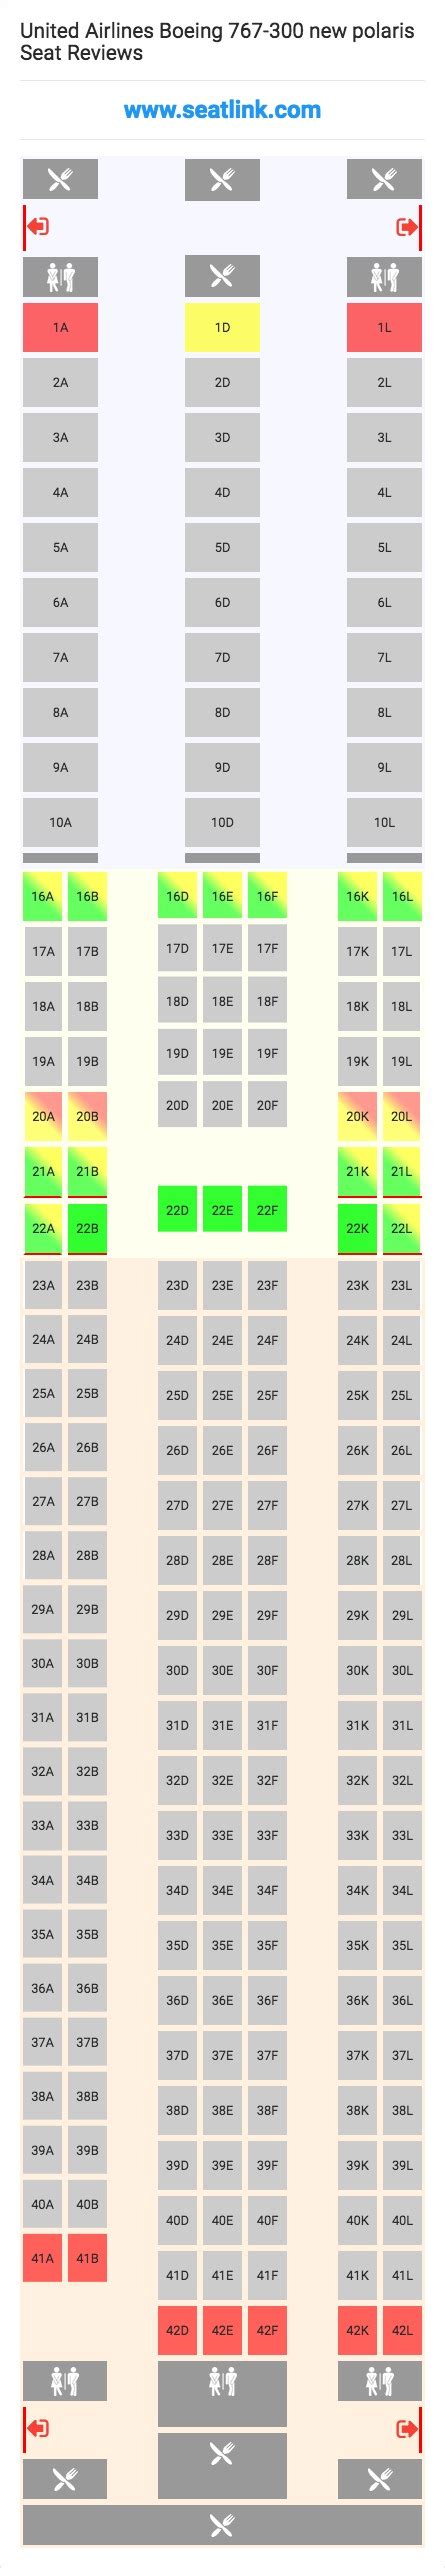 American Airlines 767 300 Seating Chart